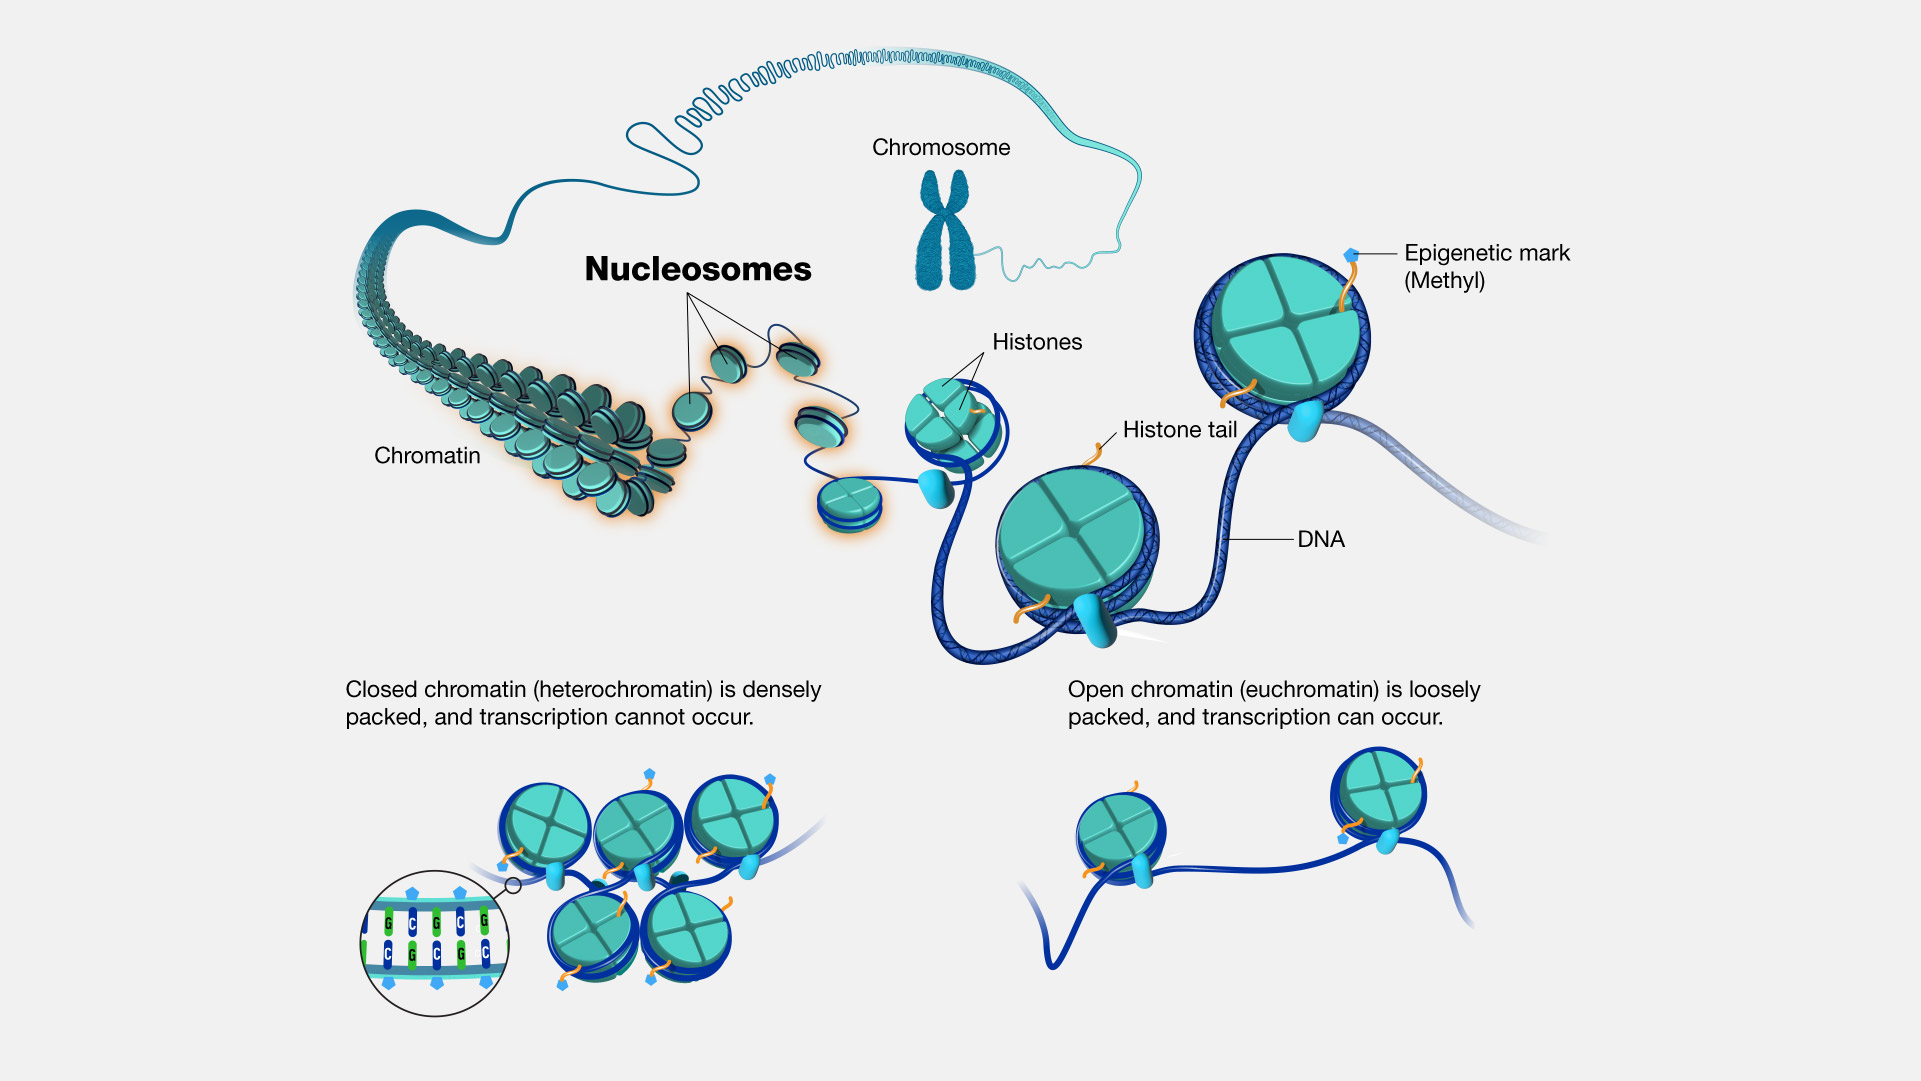 Figure 1.1 - Chromatin to Chromosome by Daniel A. Gilchrist